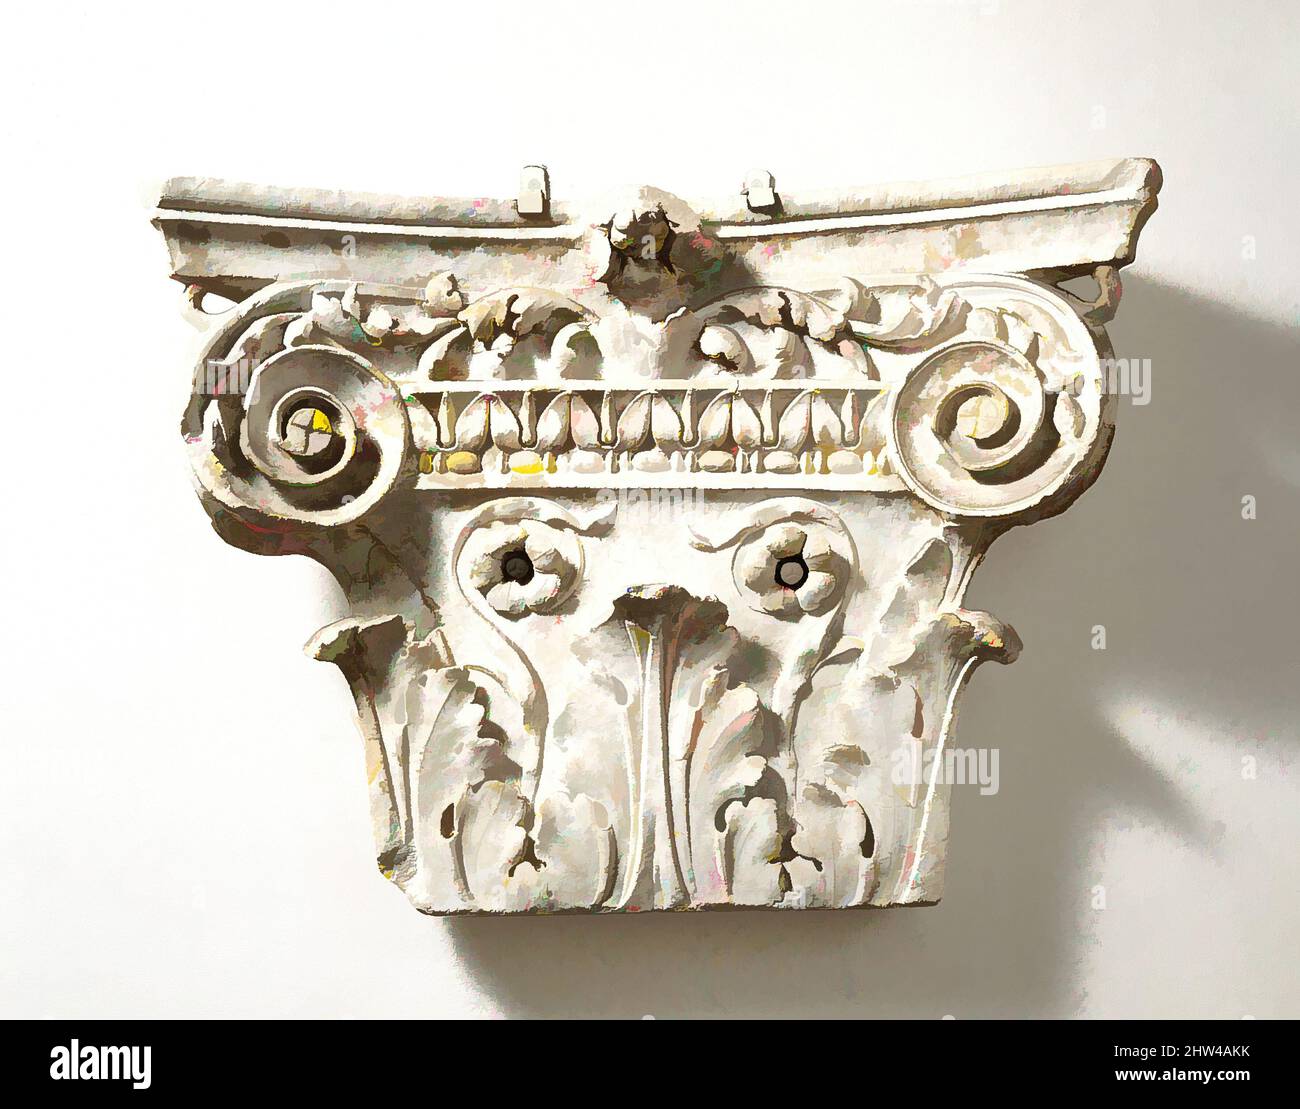 Art inspired by Marble pilaster capital, Early Imperial, Julio-Claudian, 1st half of 1st century A.D., Roman, Marble, Overall: 21 x 28in. (53.3 x 71.1cm), Stone Sculpture, The capital was once set against a wall, crowning a rectangular semi-detached pilaster. In Roman architecture, Classic works modernized by Artotop with a splash of modernity. Shapes, color and value, eye-catching visual impact on art. Emotions through freedom of artworks in a contemporary way. A timeless message pursuing a wildly creative new direction. Artists turning to the digital medium and creating the Artotop NFT Stock Photo